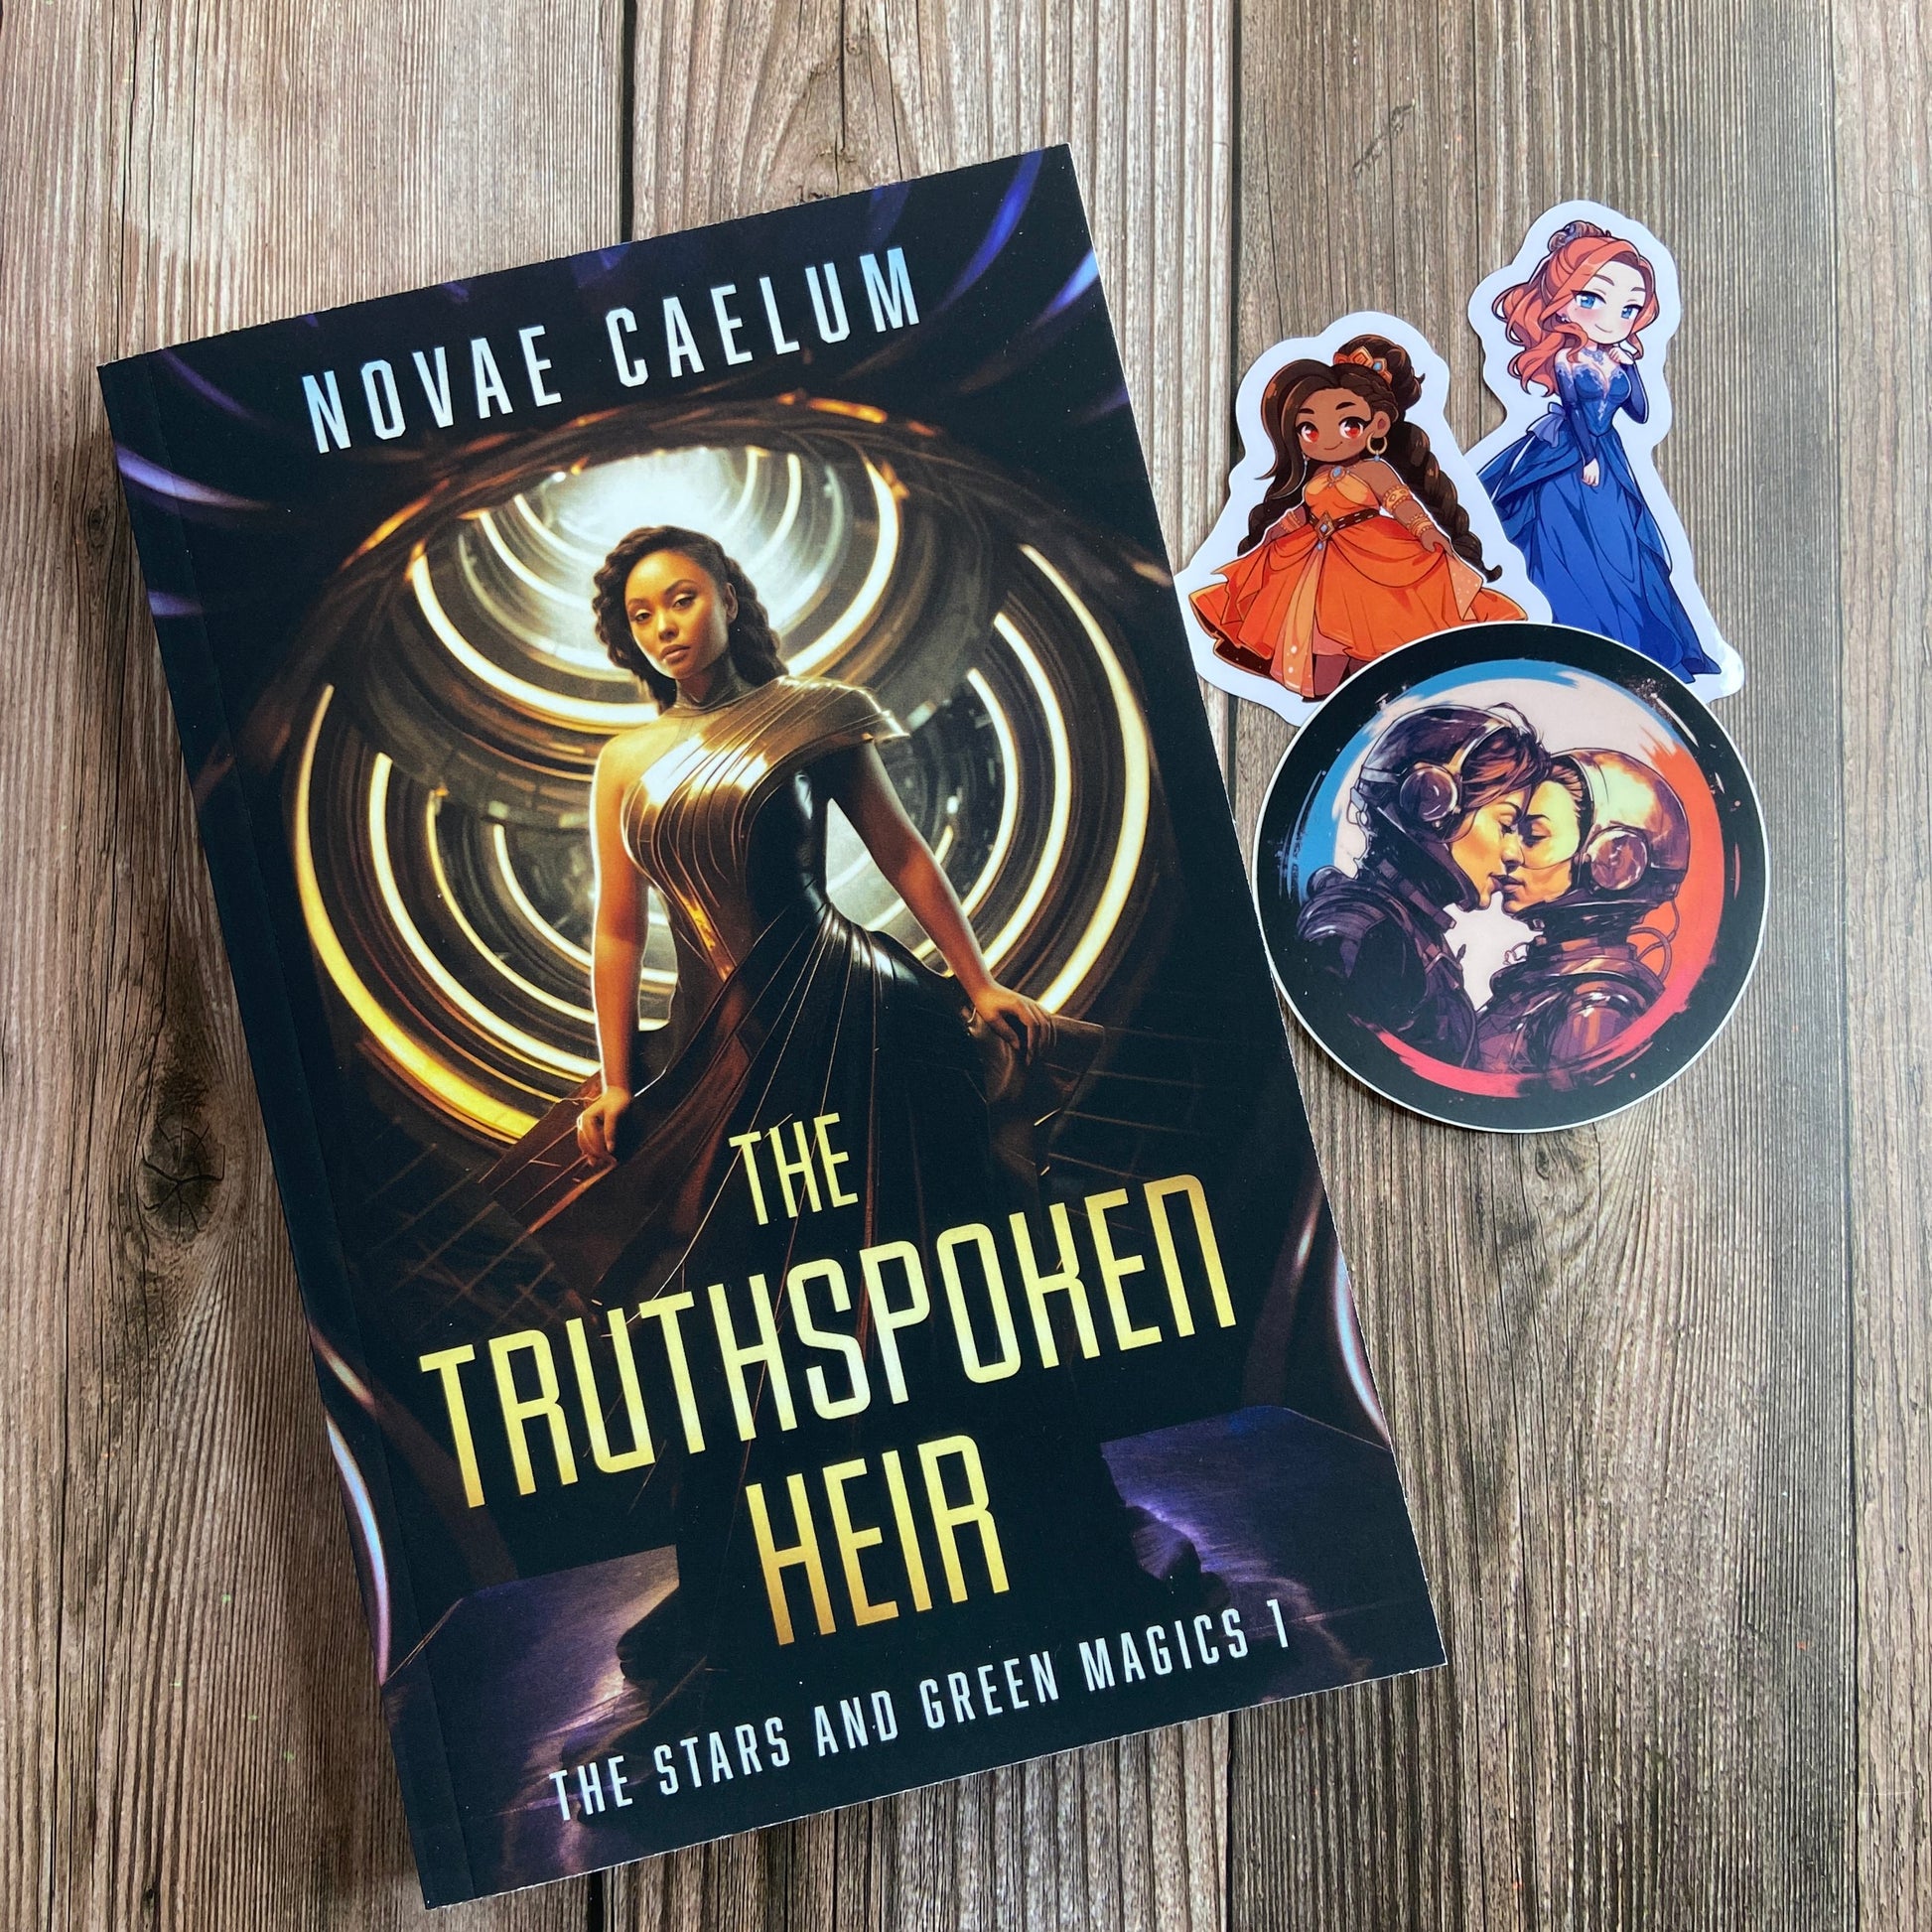 The SIGNED The Truthspoken Heir: The Stars and Green Magics Book 1 (Paperback) by Novae Caelum, a tale of a forbidden love in a kingdom where shapeshifting powers rule.